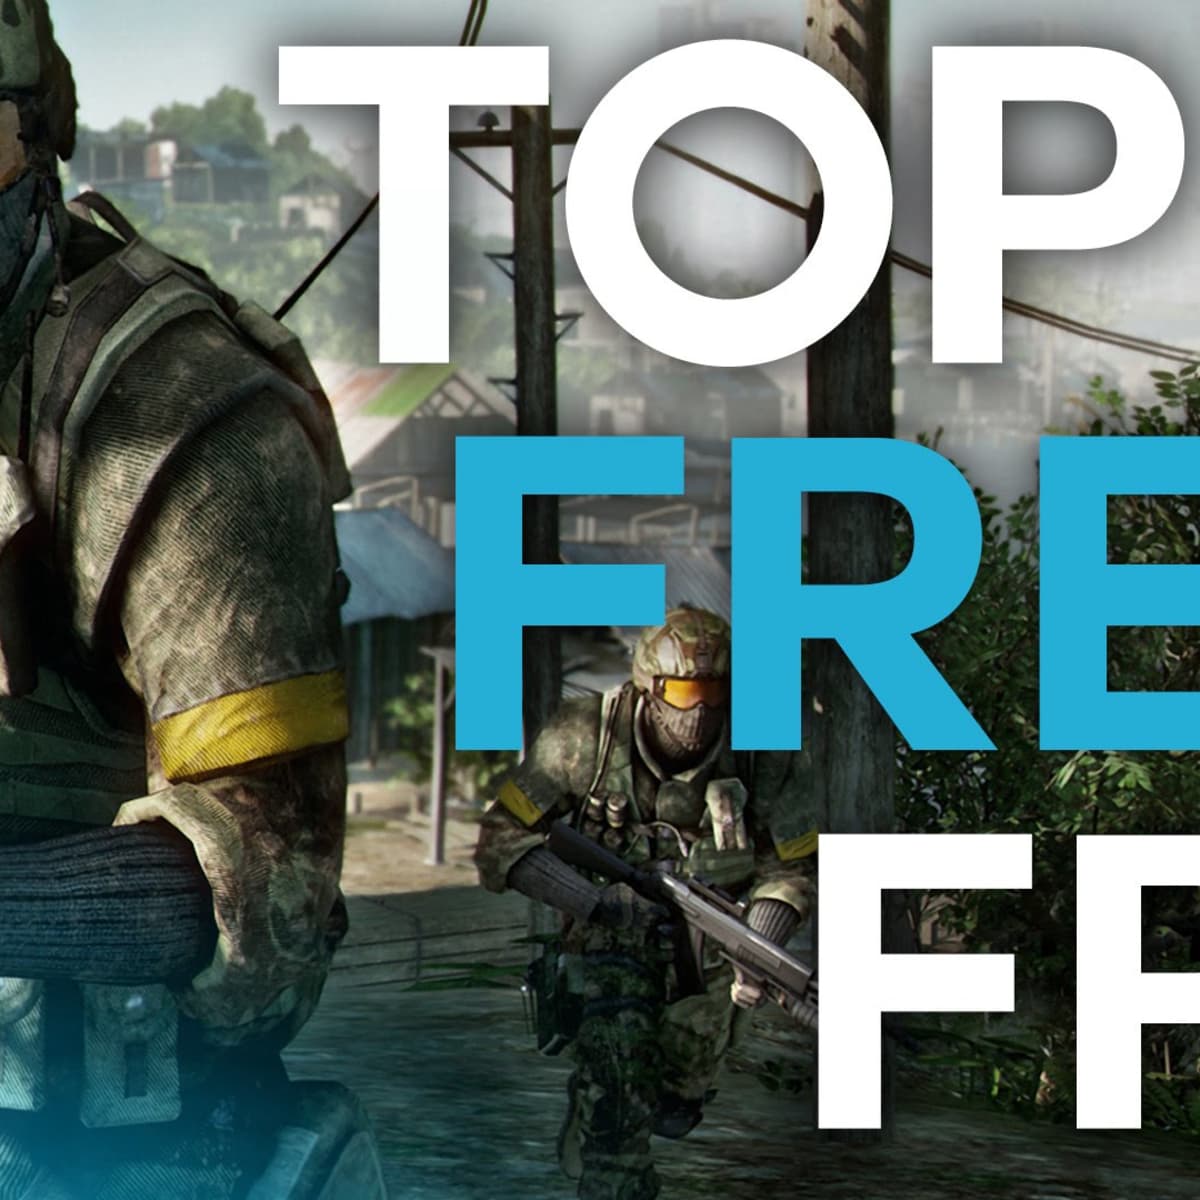 Top 5 FPS Games on Steam - HubPages